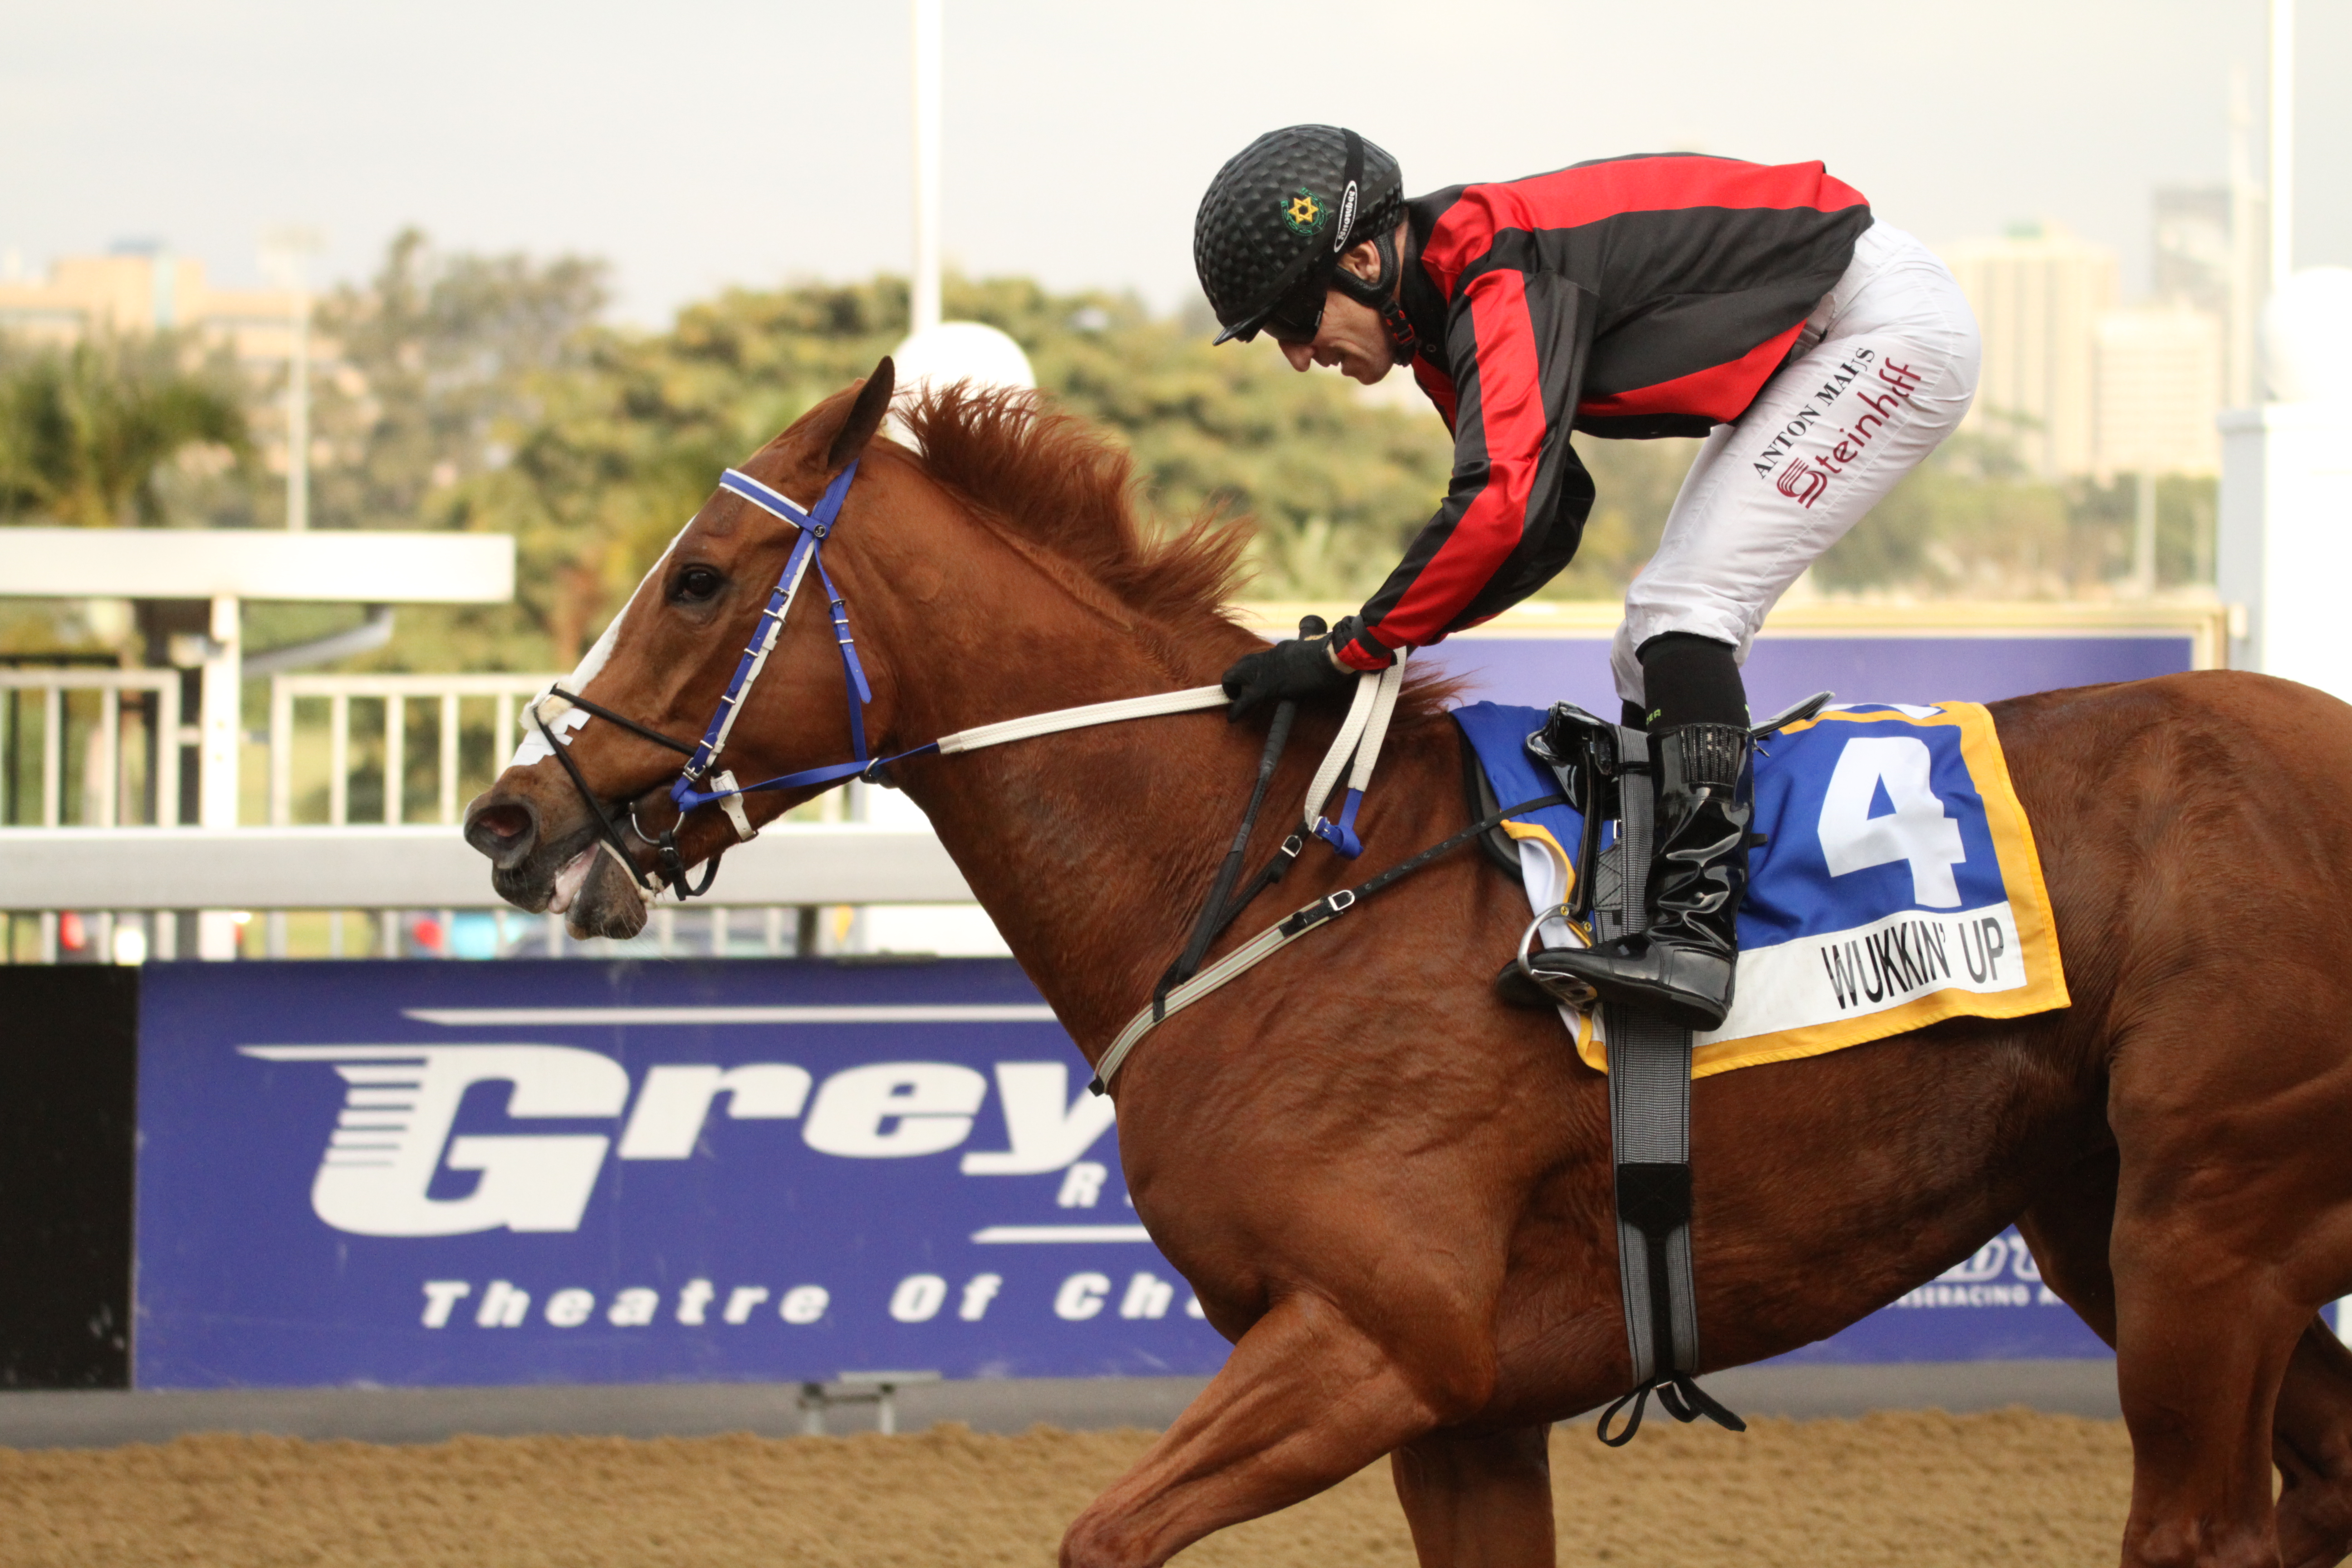 KZN-Bred Wukkin’ Up Secures Off To Stud Listed